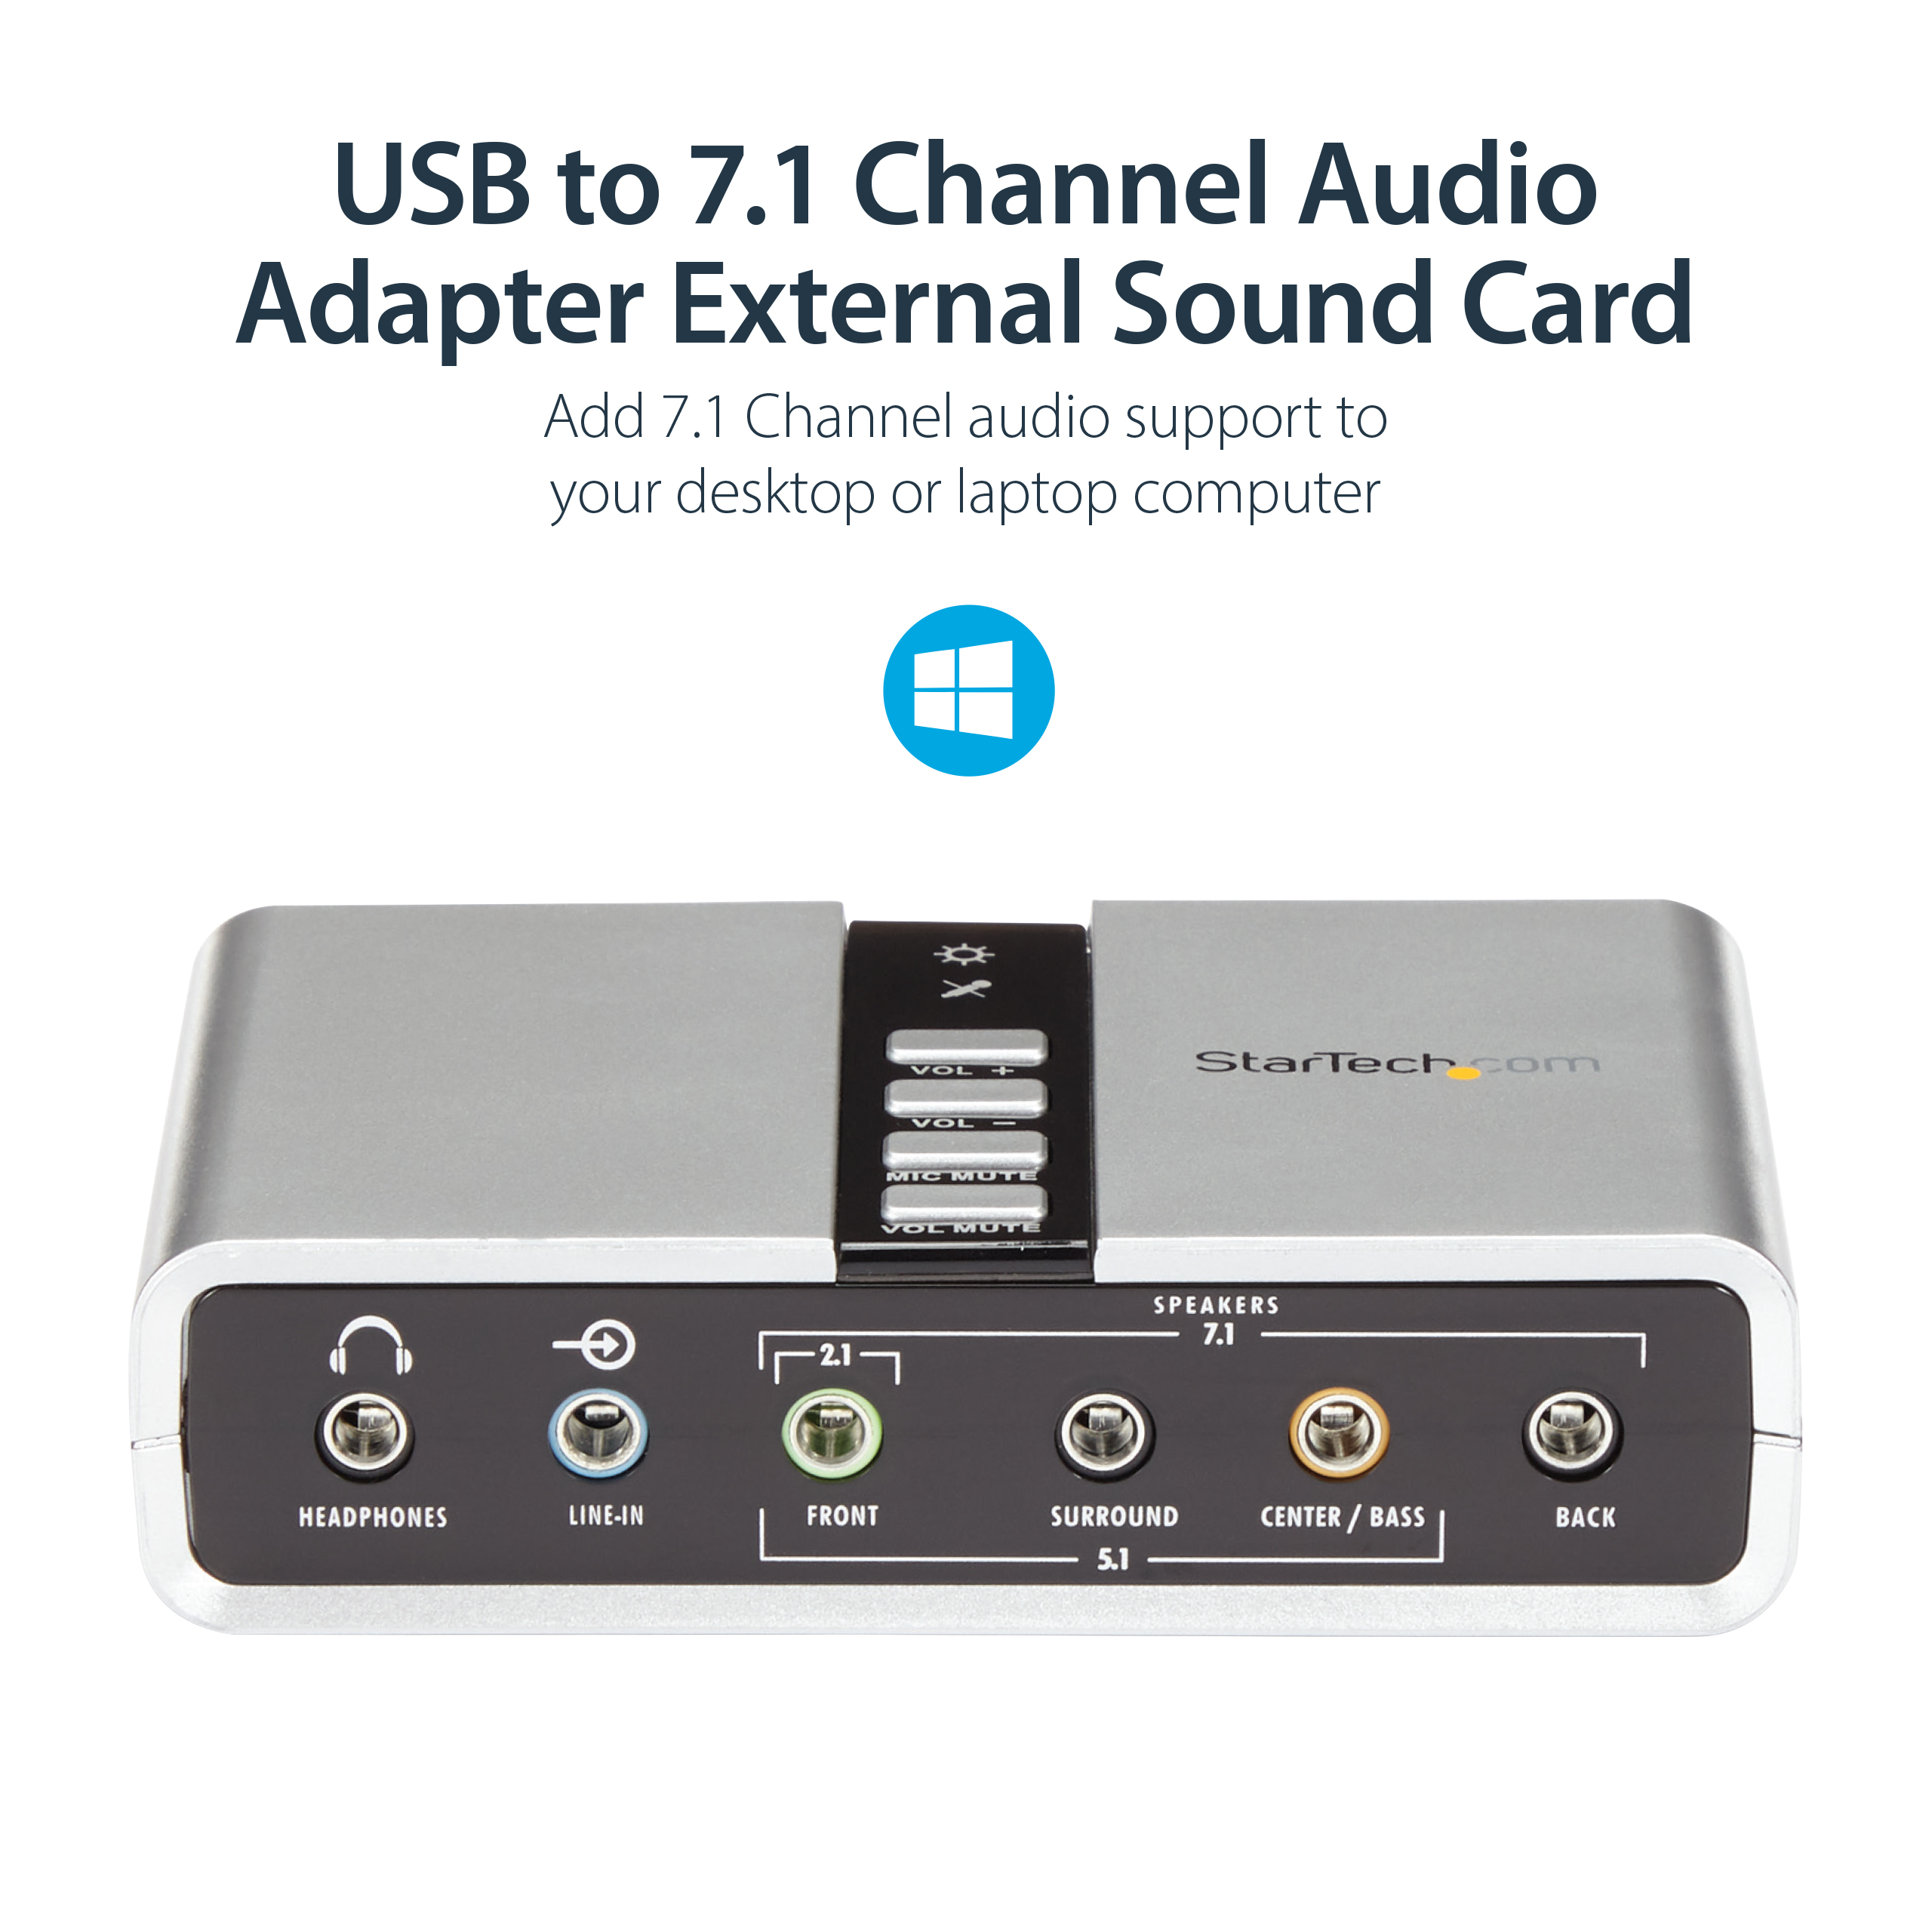 StarTech.com 7.1 USB Sound Card - External Sound Card for Laptop with SPDIF Digital Audio - Sound Card for PC - Silver - image 3 of 6